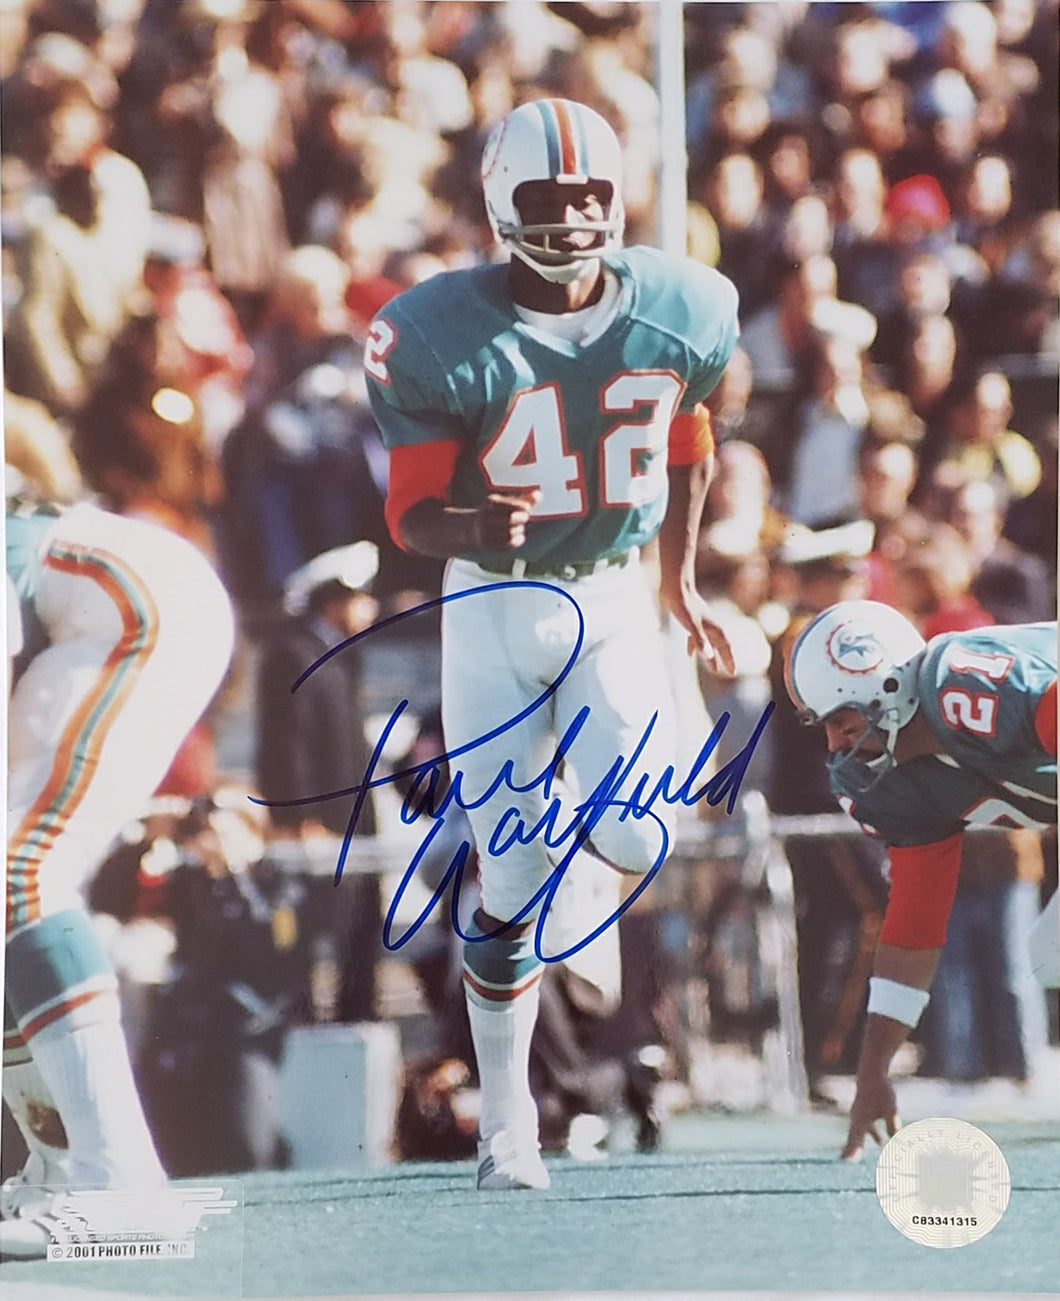 Paul Warfield Signed Autographed 8x10